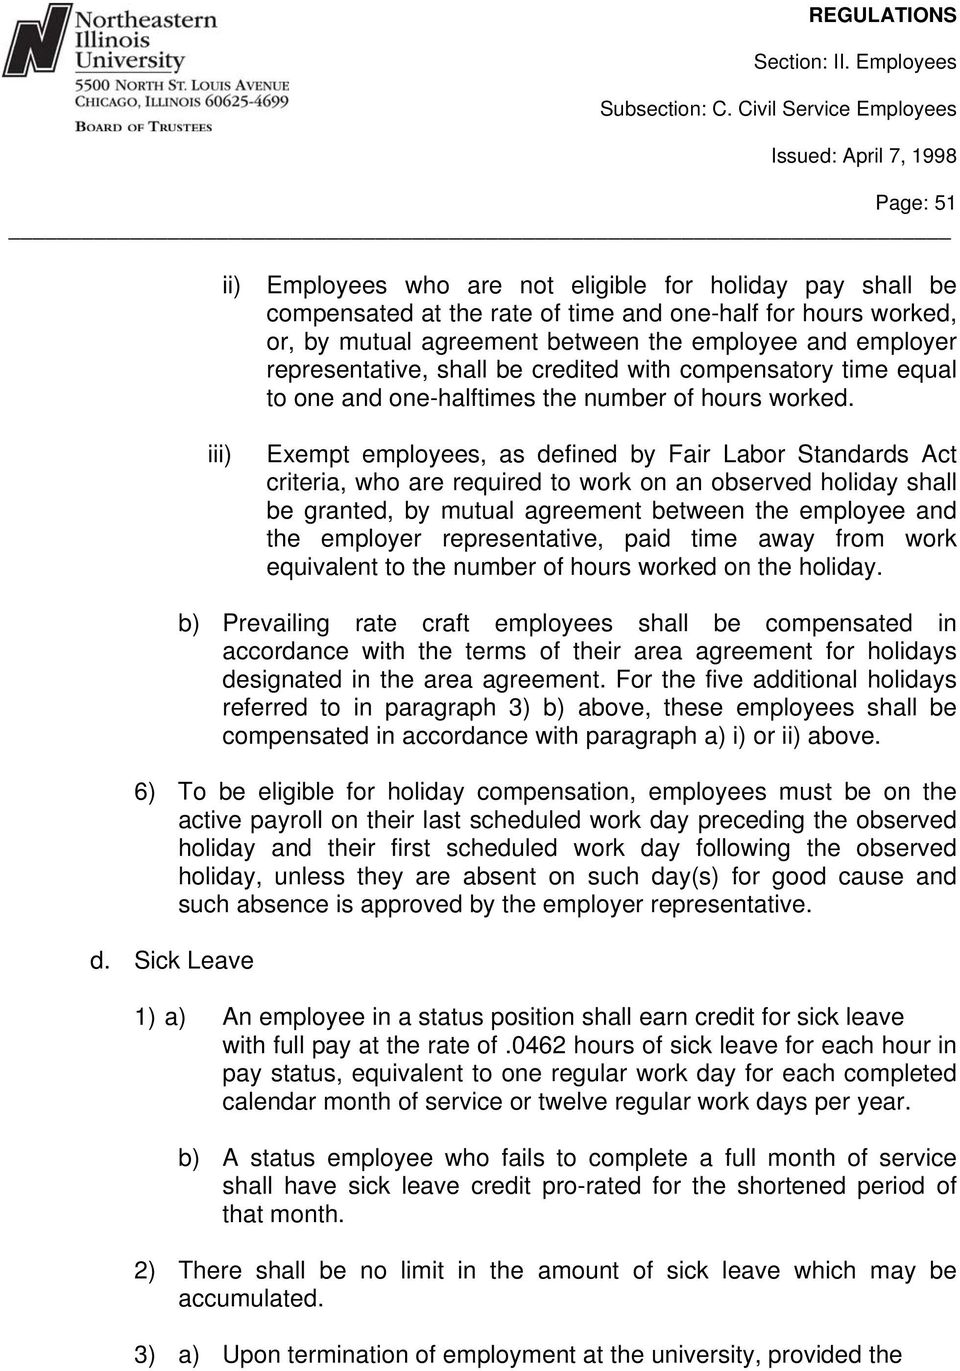 iii) Exempt employees, as defined by Fair Labor Standards Act criteria, who are required to work on an observed holiday shall be granted, by mutual agreement between the employee and the employer